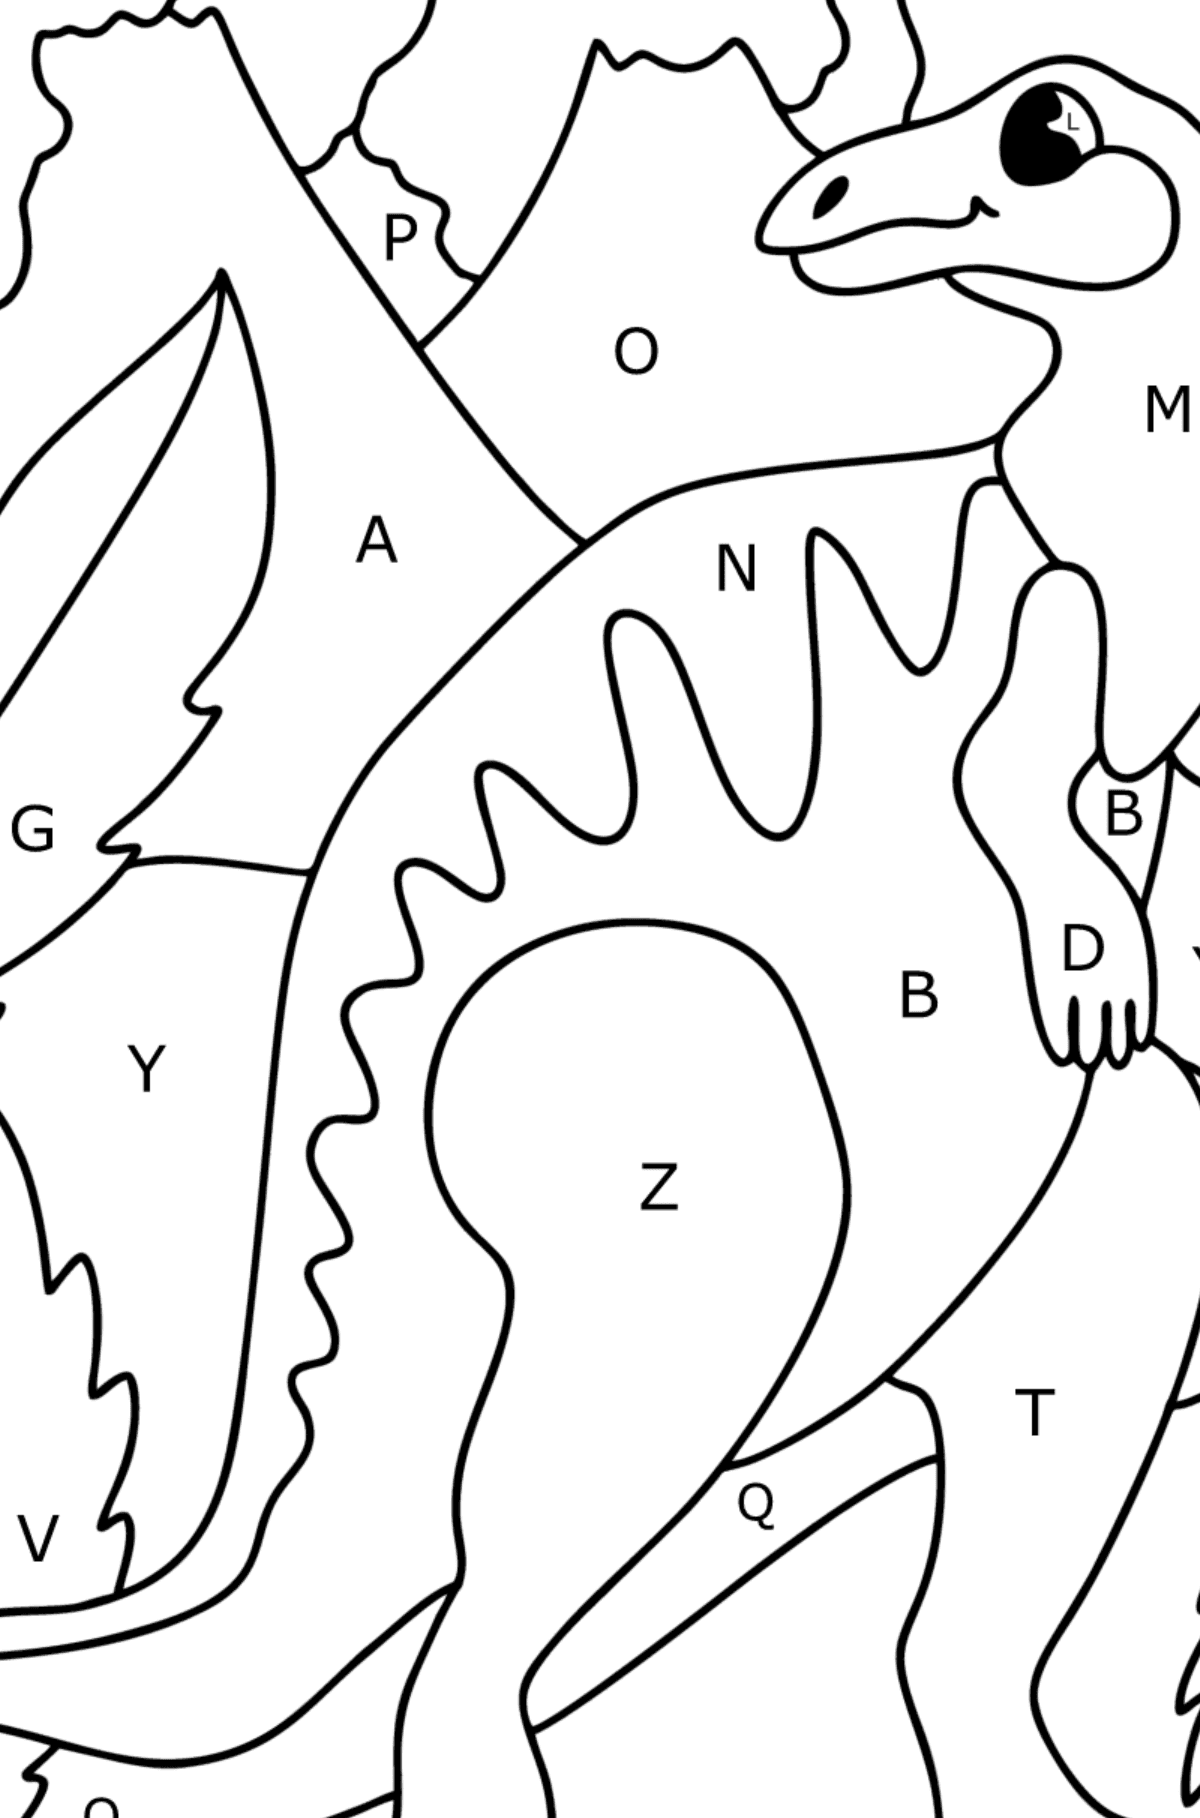 Hadrosaur coloring page - Coloring by Letters for Kids